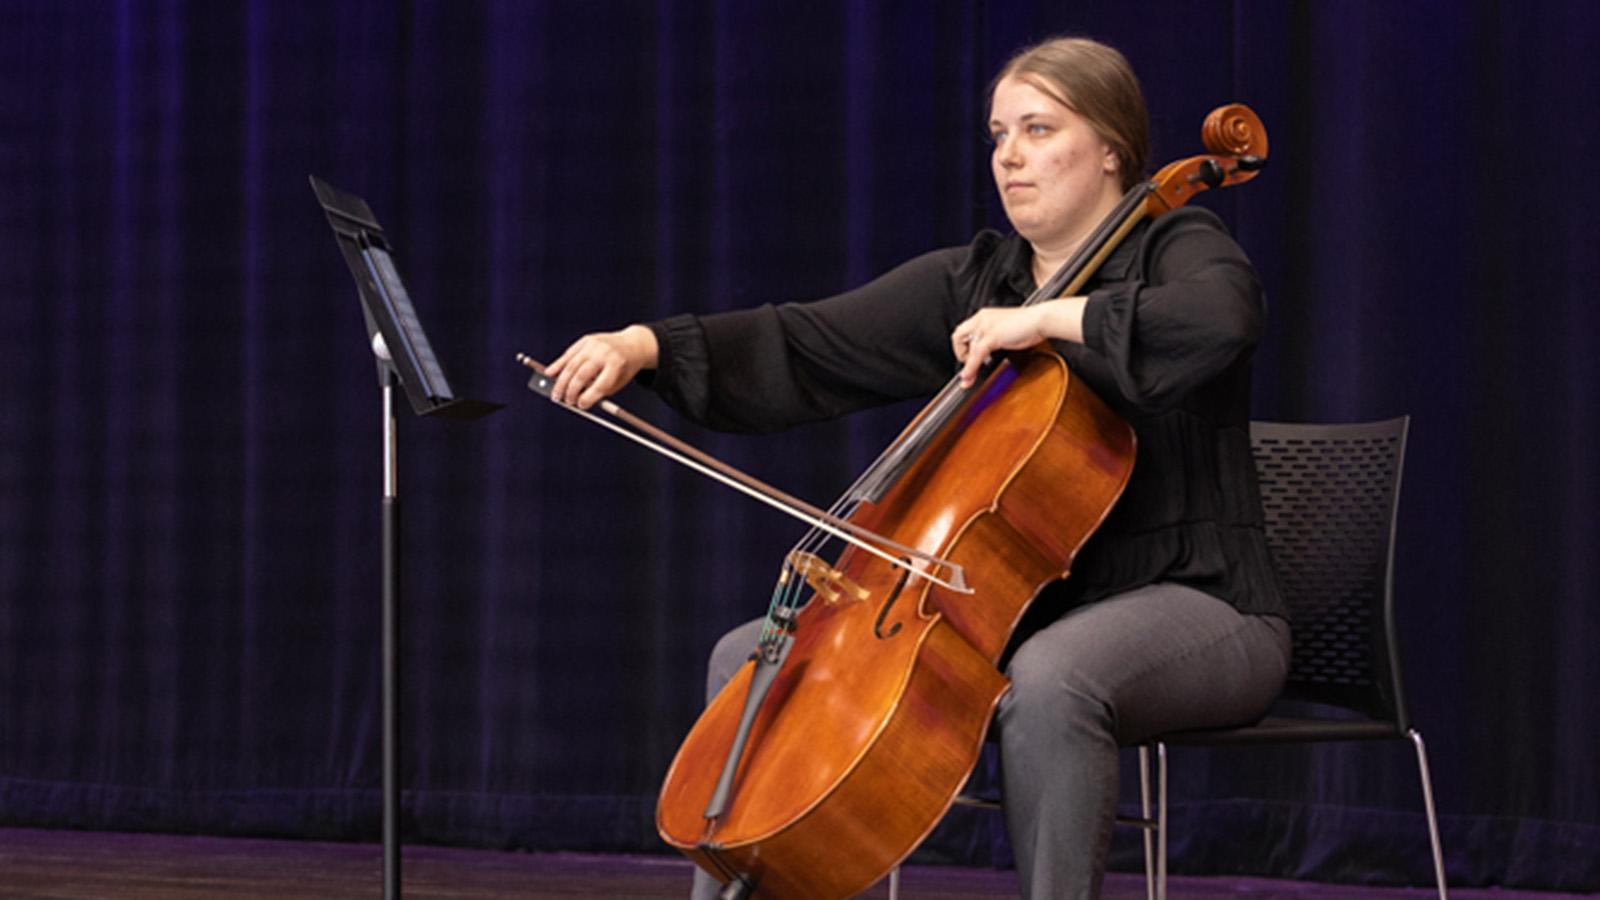 Cellist Lydia performing at Immerse concert